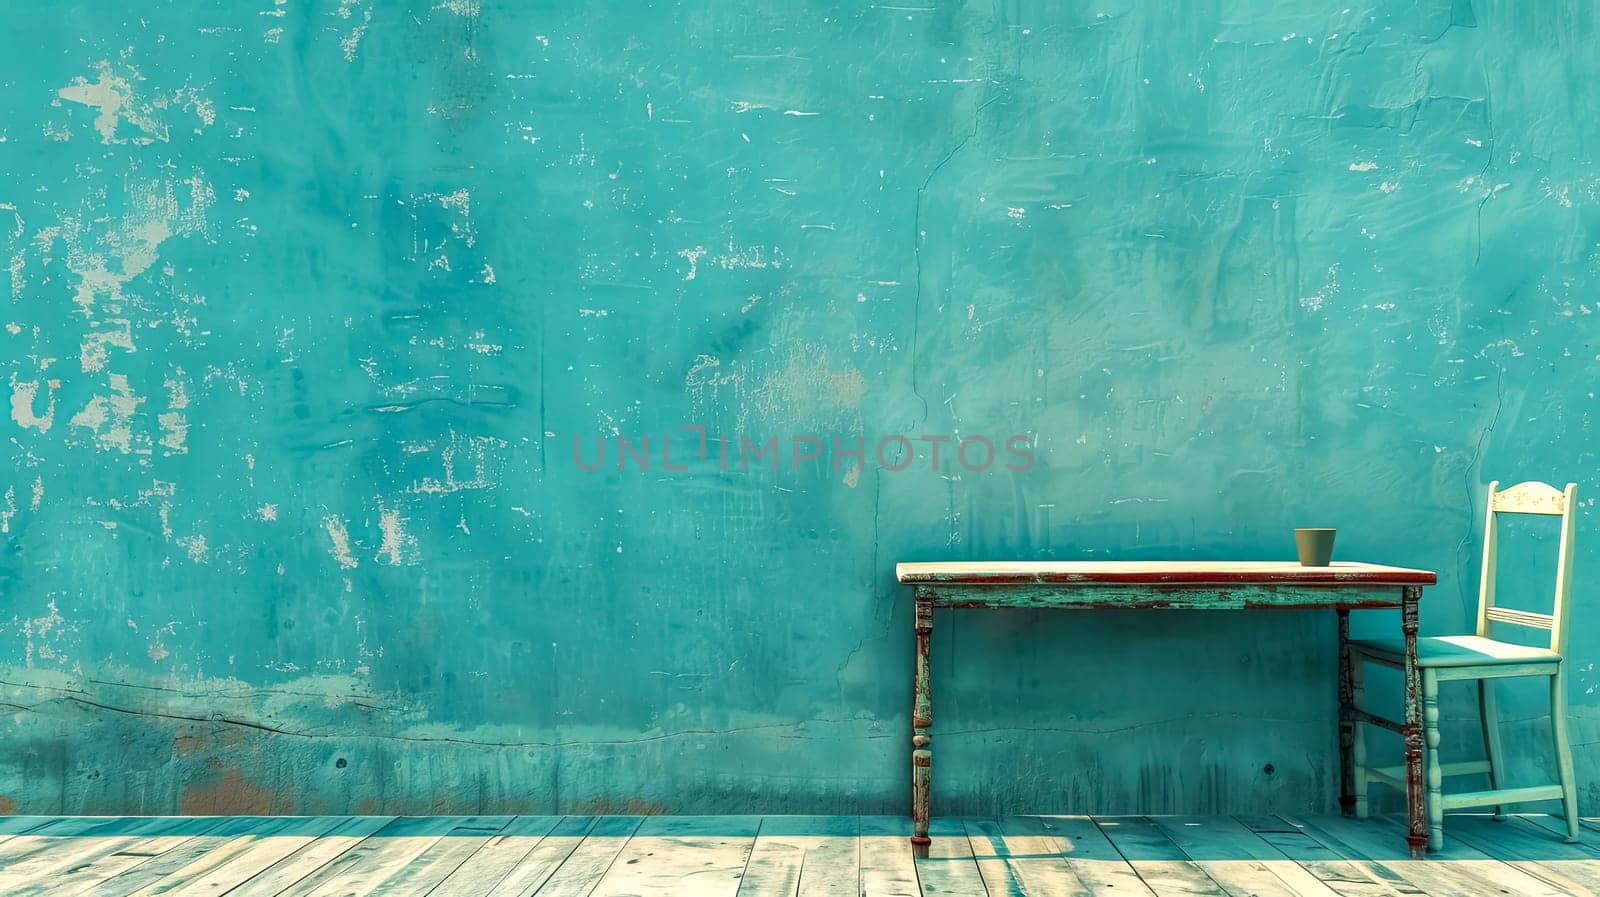 Rustic Workspace with Vintage Desk and Chair Against Turquoise Wall, copy space